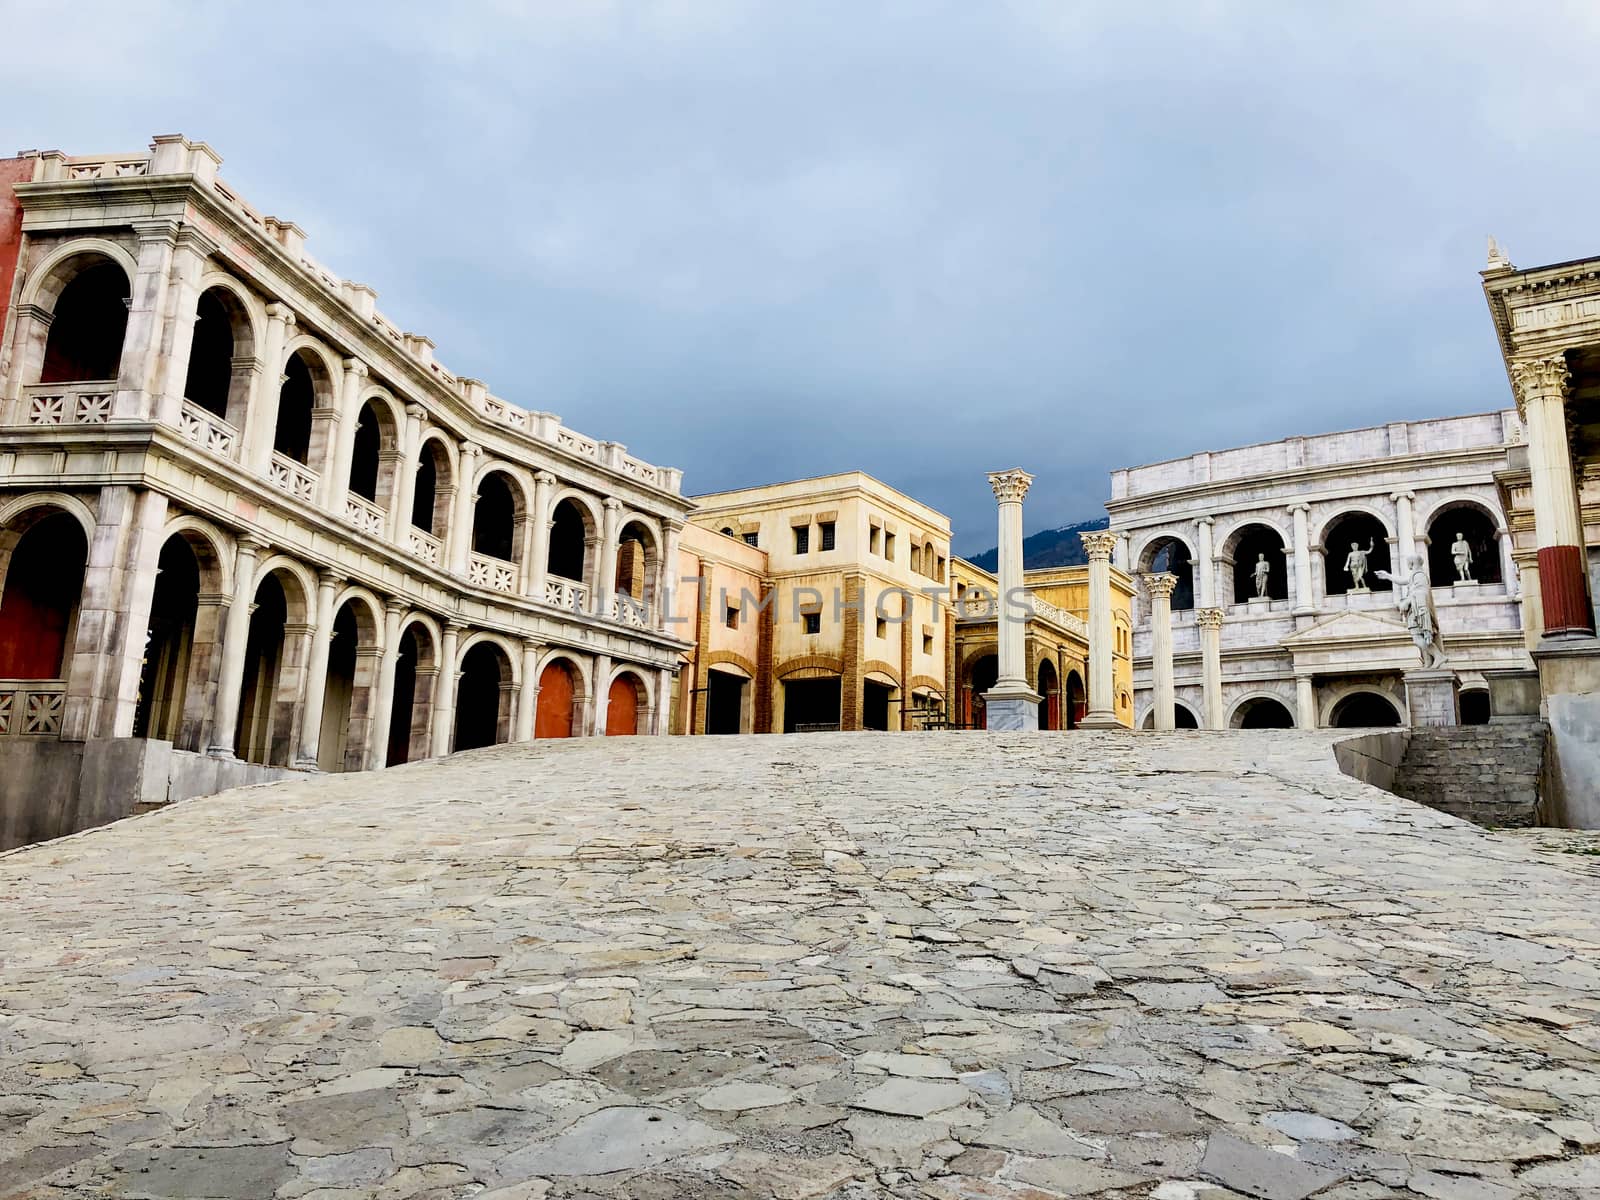 roman style buildings perspective path way by F1b0nacci